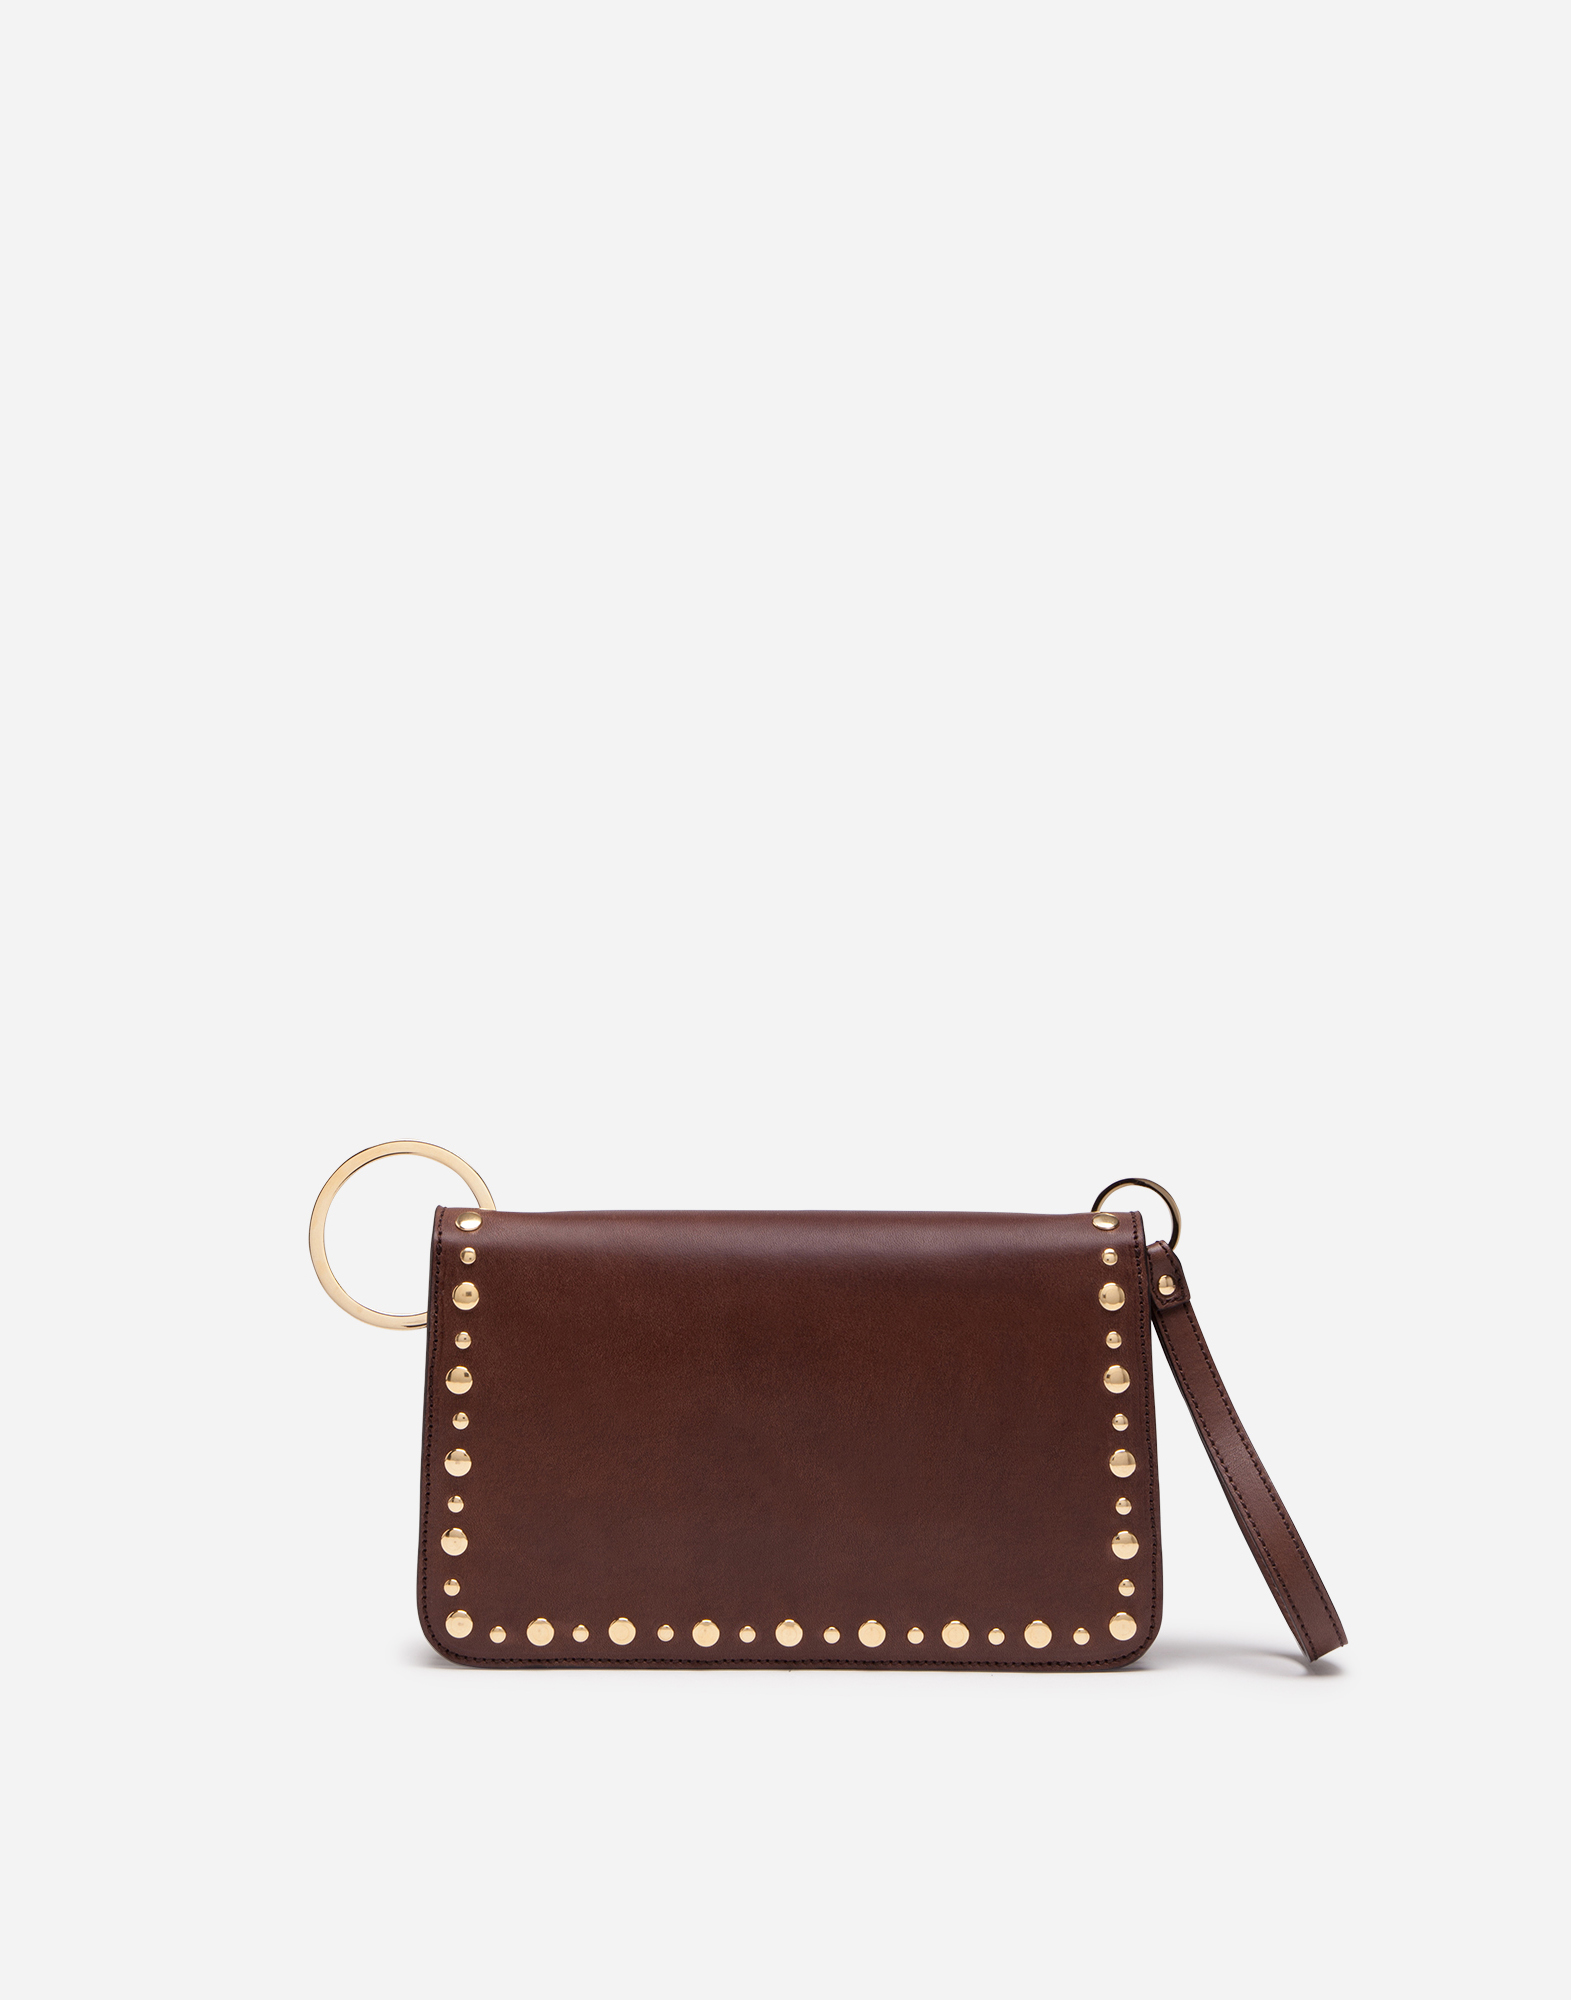 DOLCE & GABBANA BIKER BAG IN COWHIDE WITH EMBROIDERED STUDS